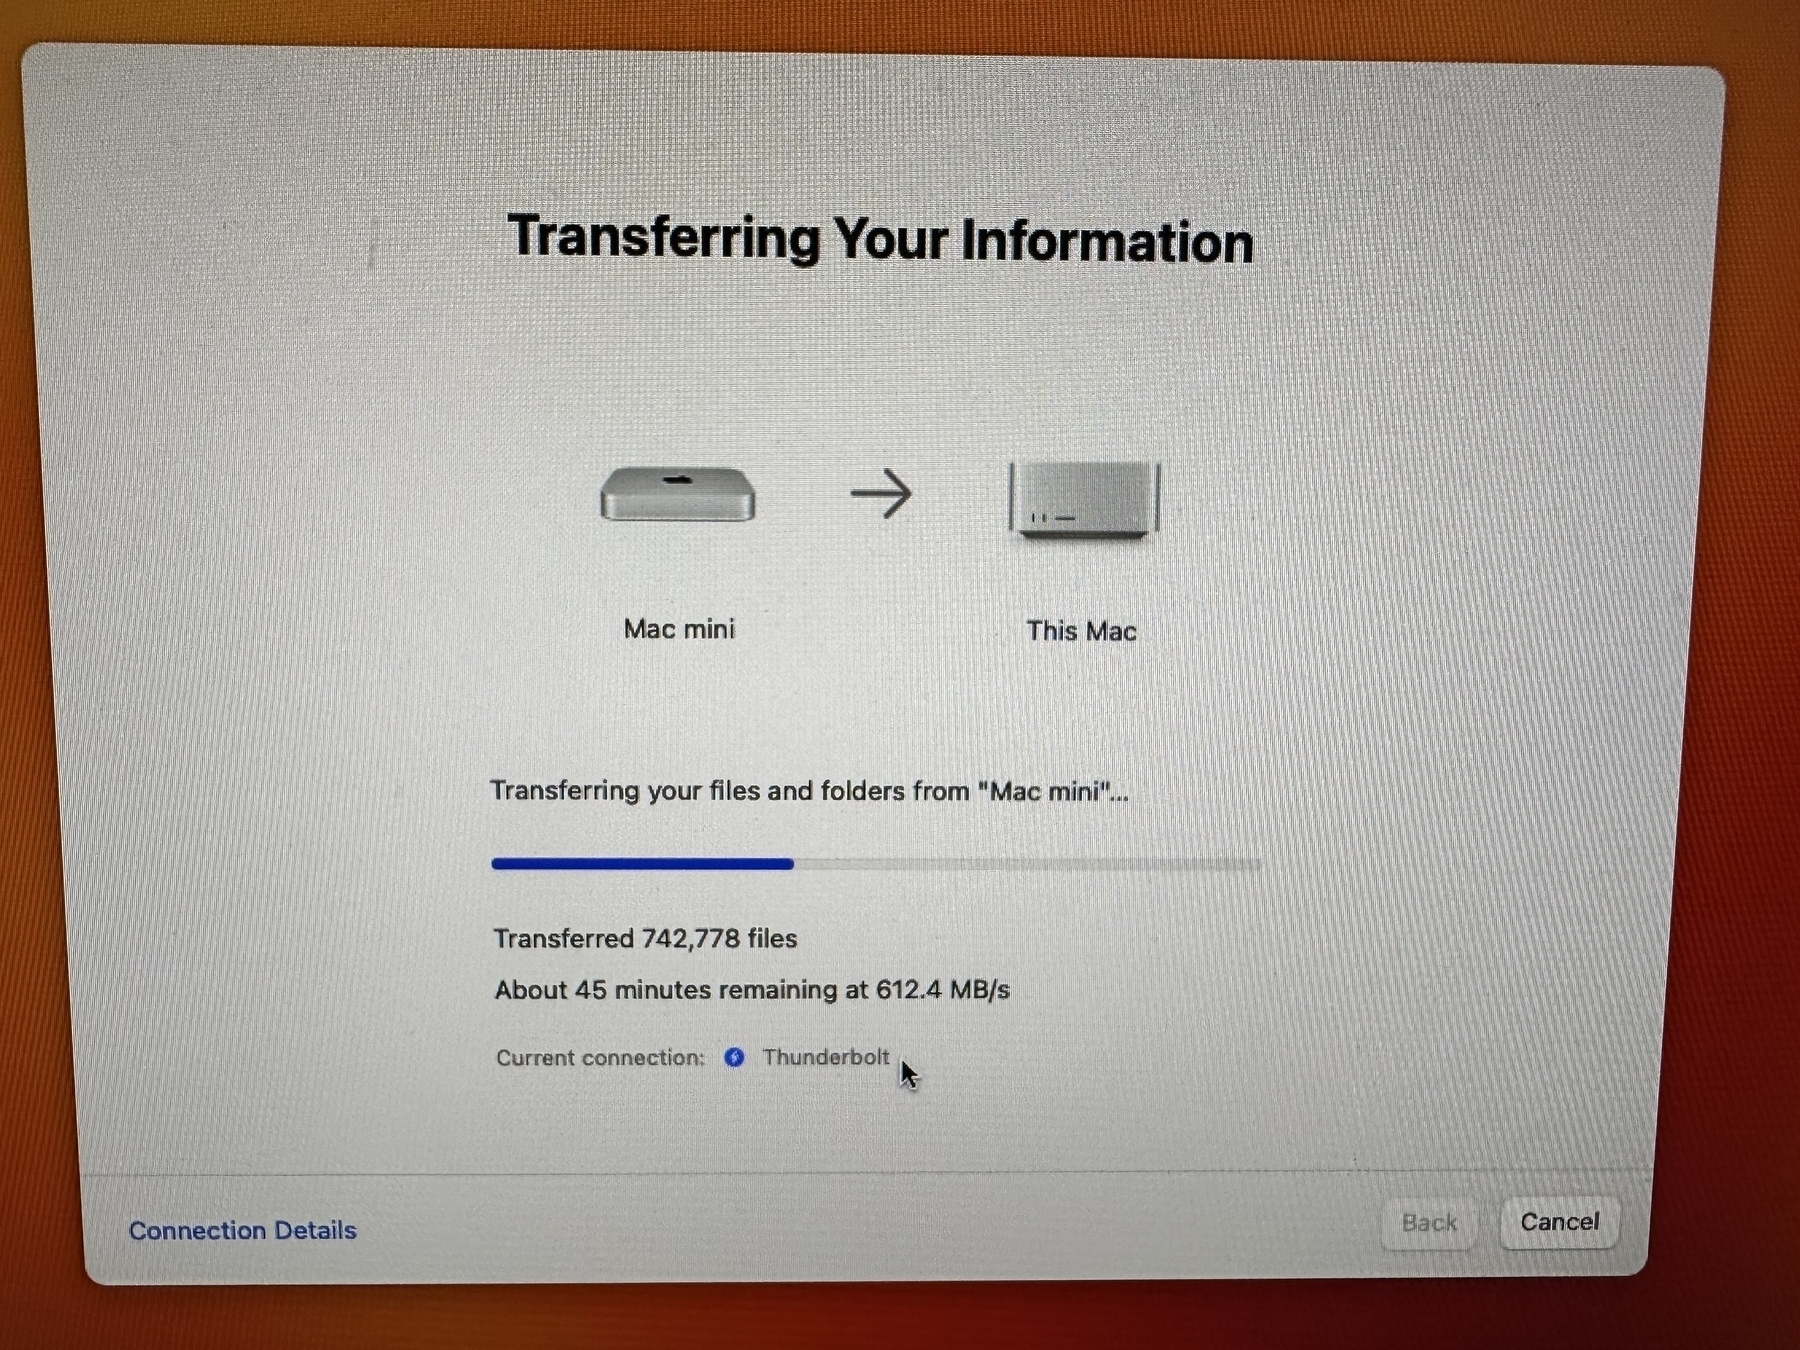 Migration Assistant dialog showing 612 MB/s transfer speed.